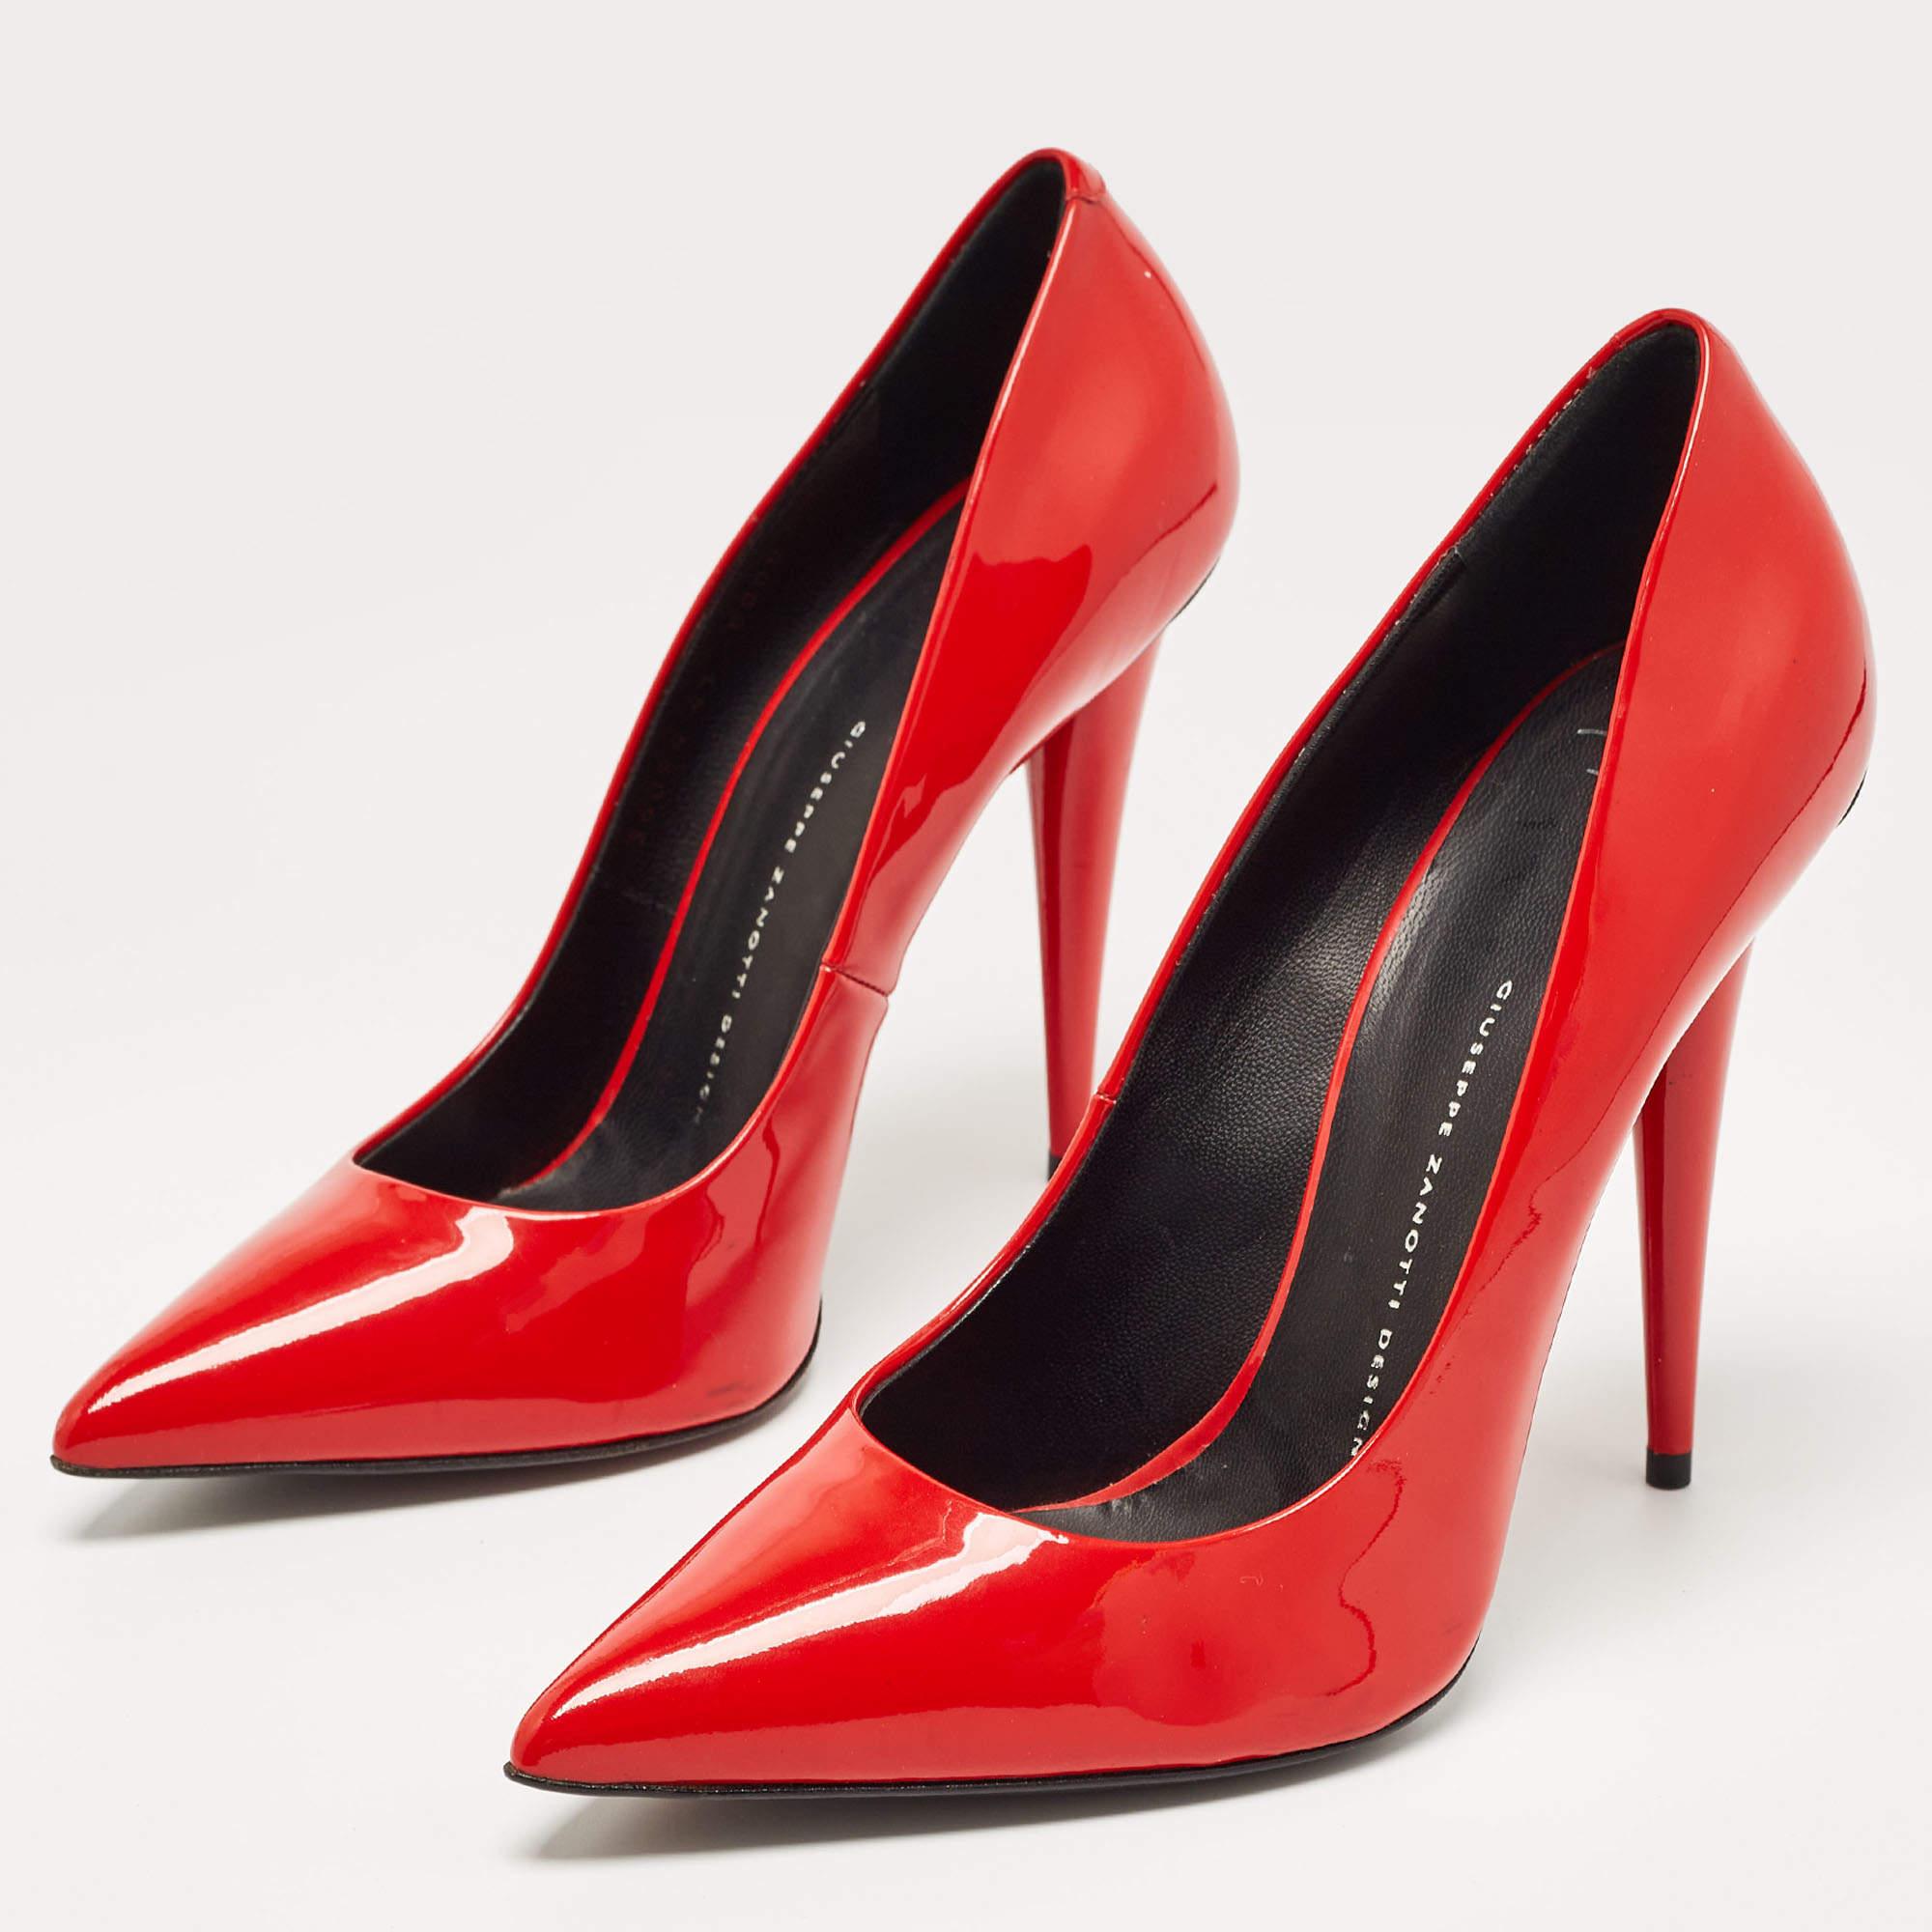 Exuding femininity and elegance, these Giuseppe Zanotti pumps feature a chic silhouette with an attractive design. You can wear these pumps for a stylish look.

